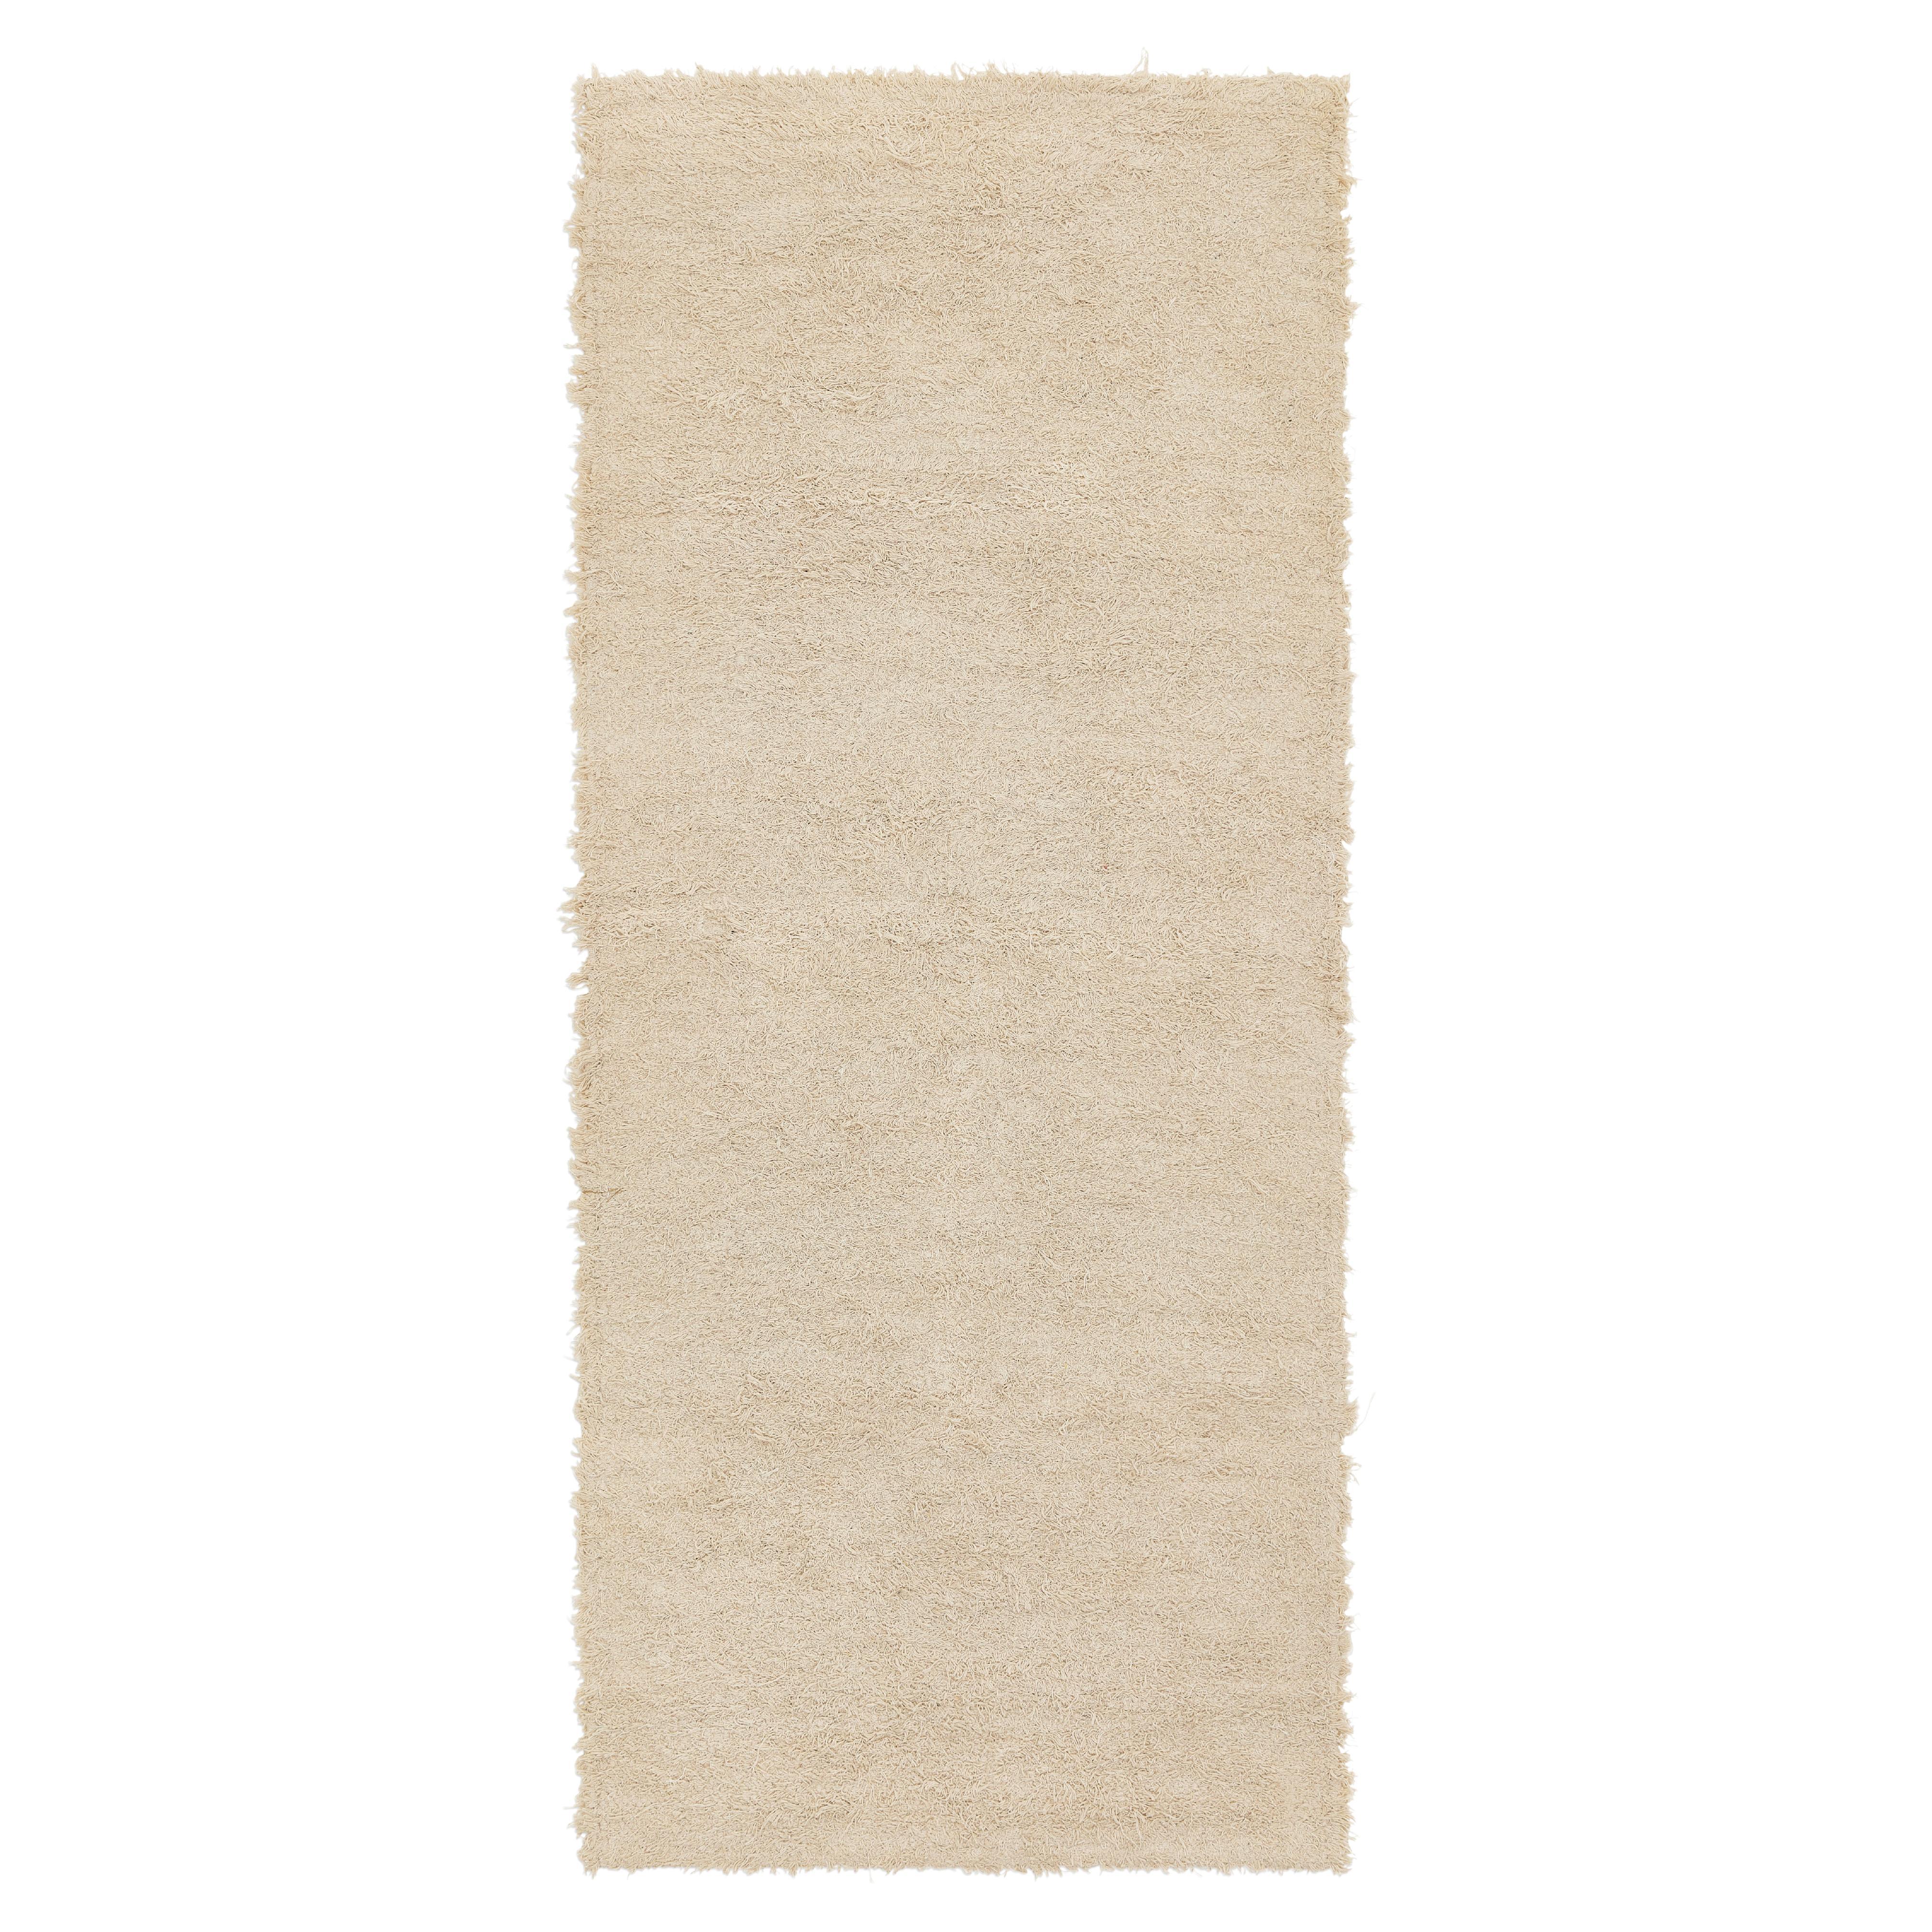 Cotton Flatweave Bath Mat - Taupe Small For Sale